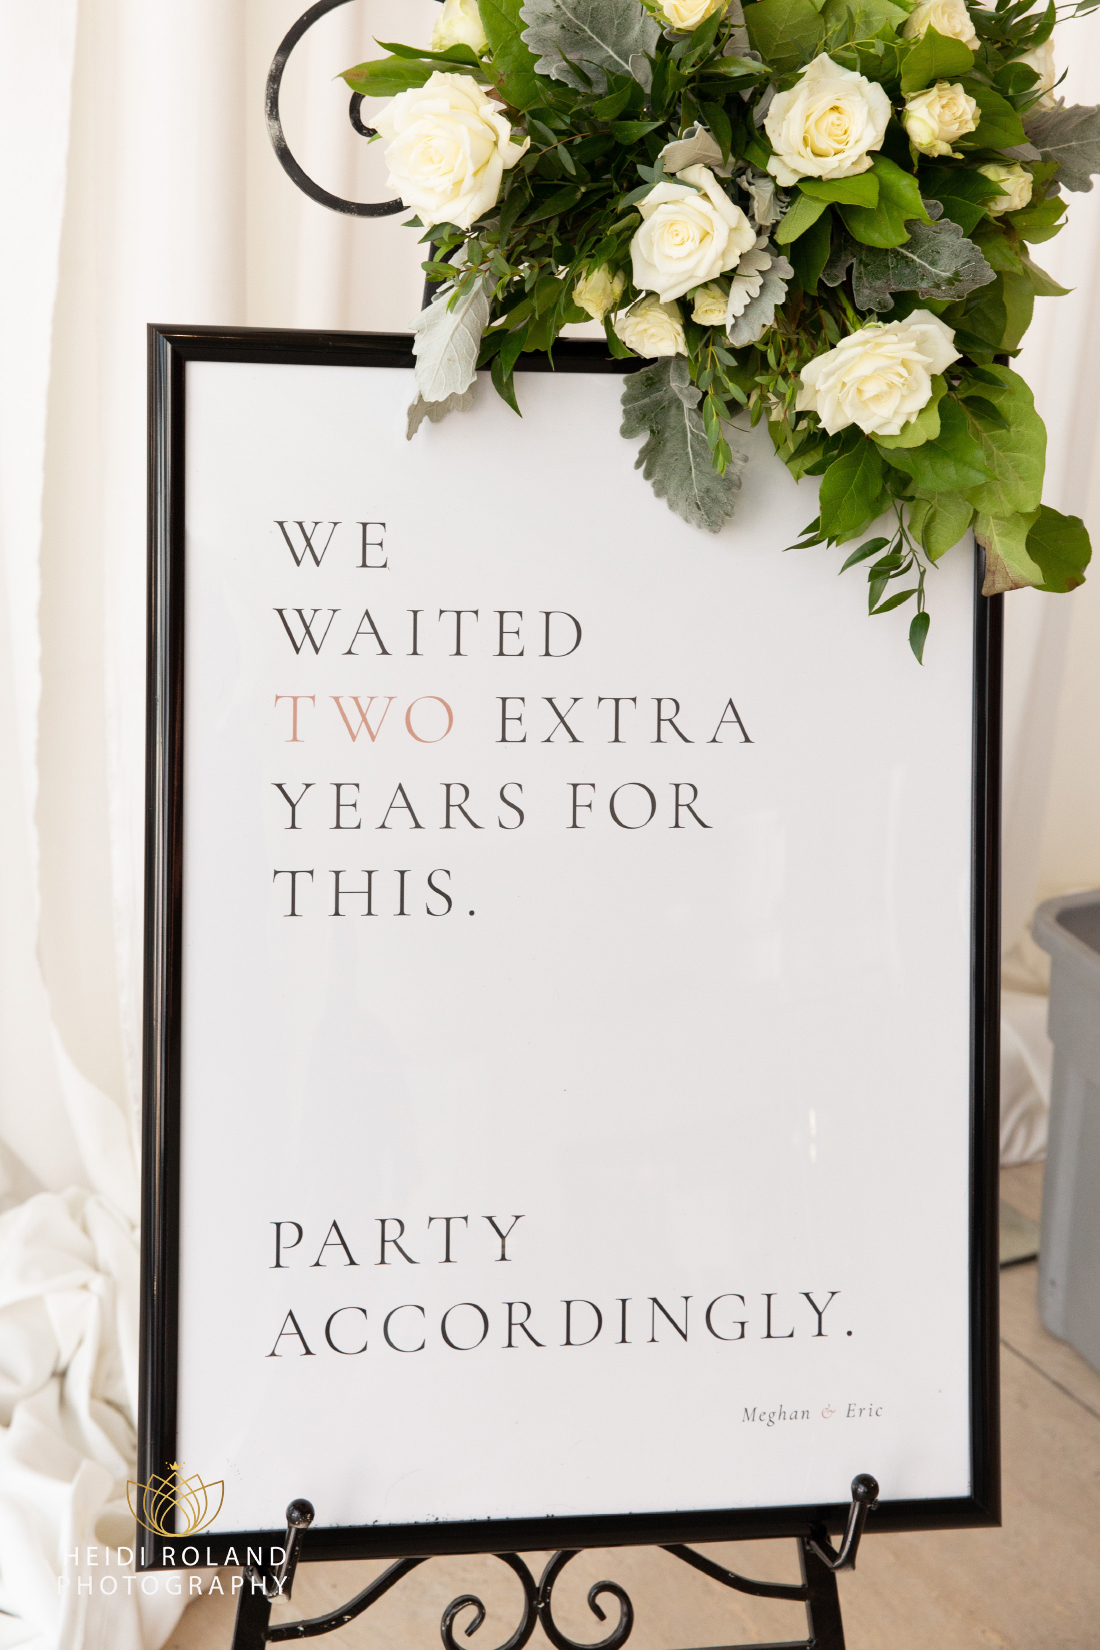 Sign reading we waited two extra years for this. party accordingly. for philadelphia wedding